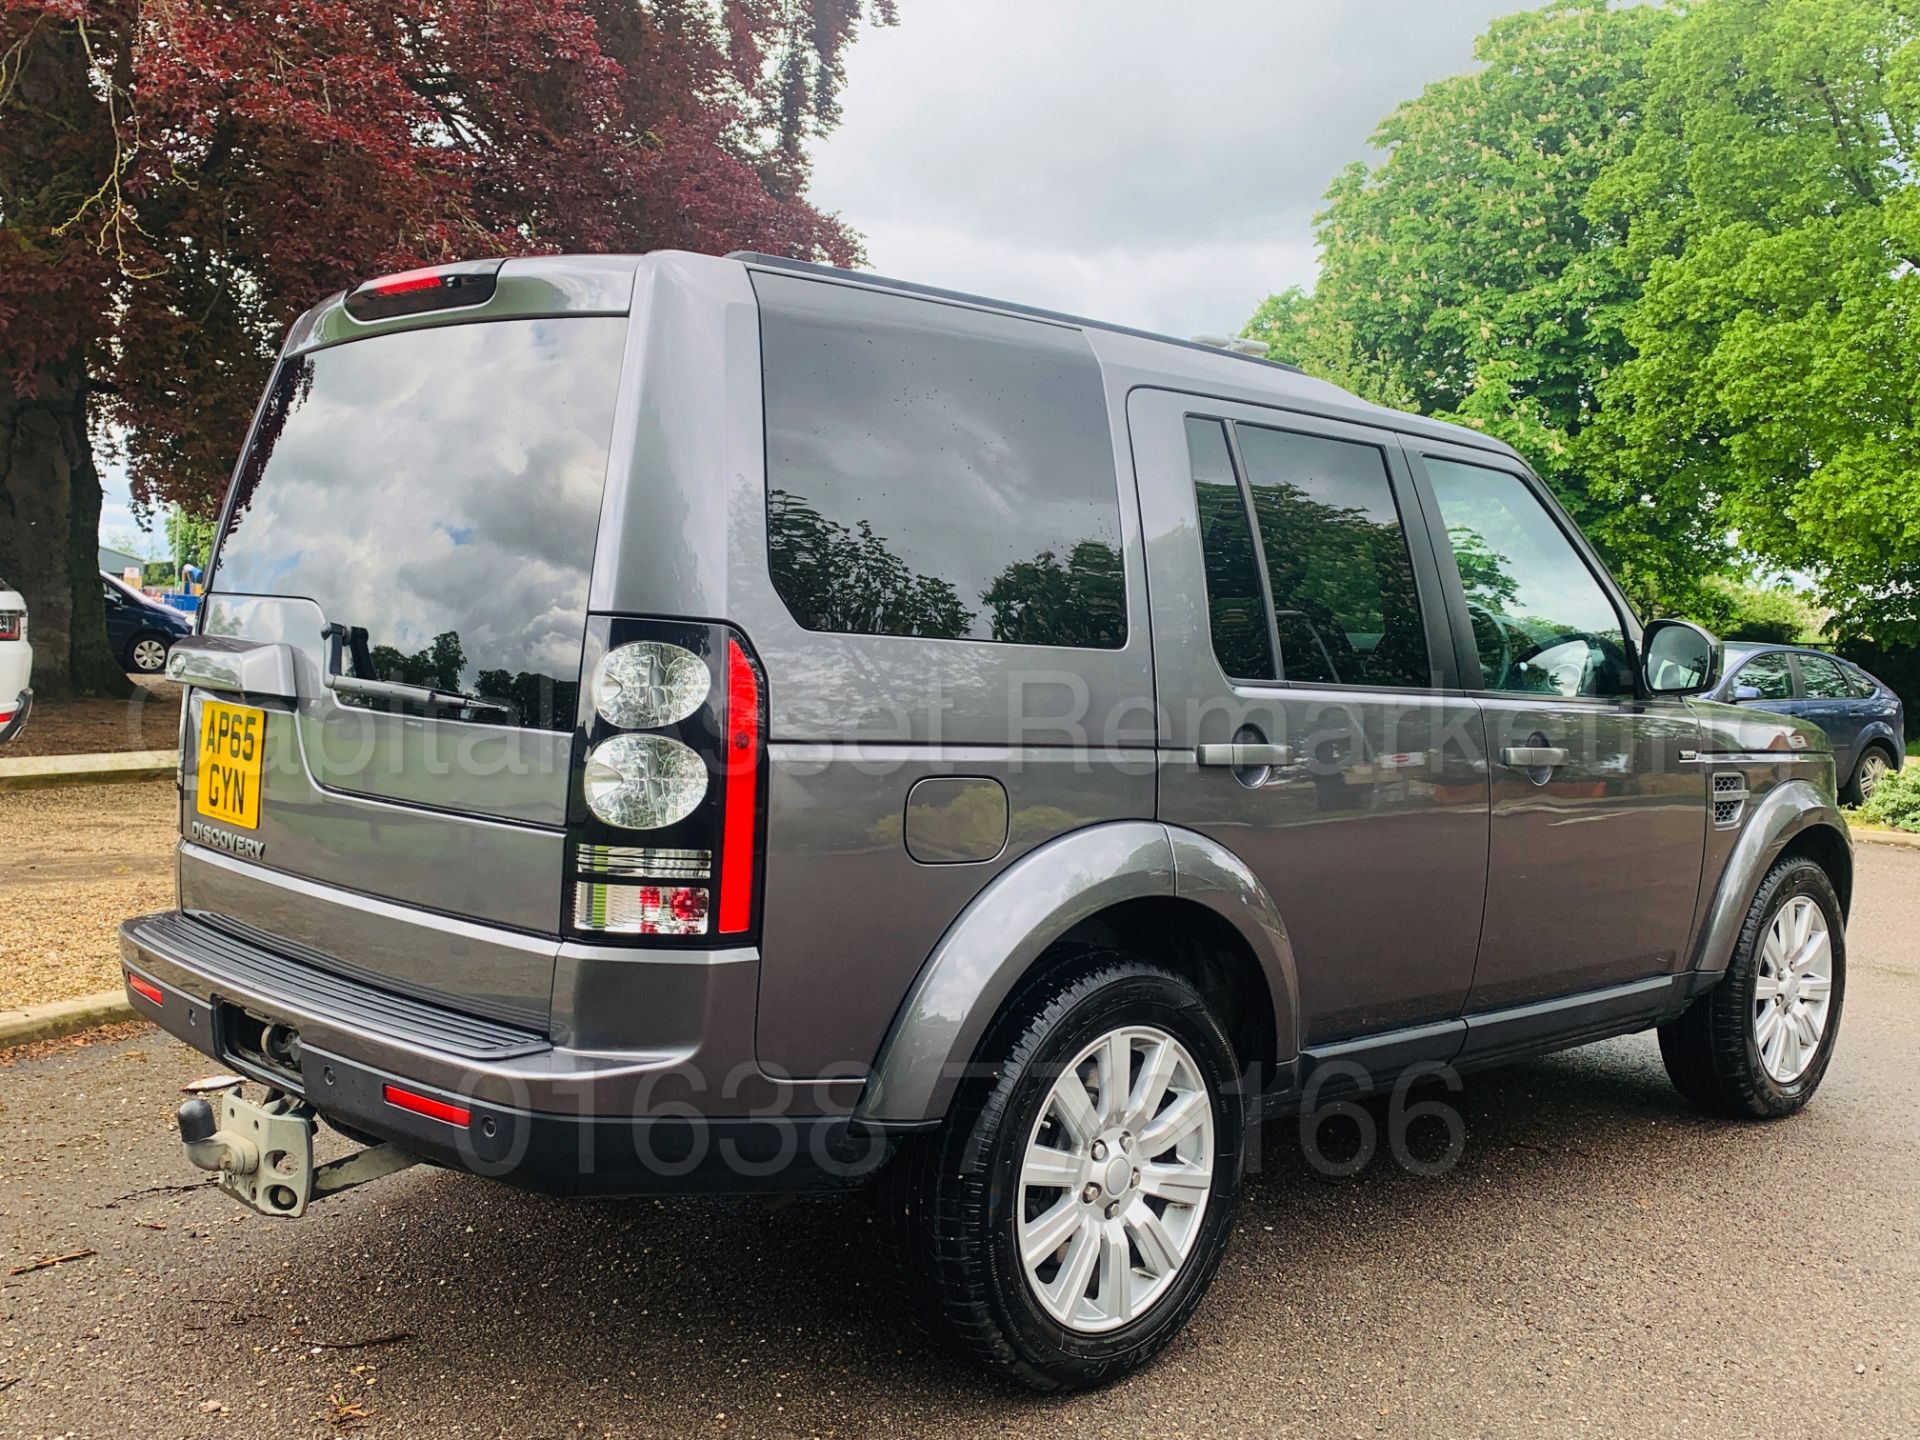 (On Sale) LAND ROVER DISCOVERY 4 *SE EDITION* (65 REG) '3.0 SDV6 - 255 BHP - 8 SPEED AUTO' (1 OWNER) - Image 12 of 57